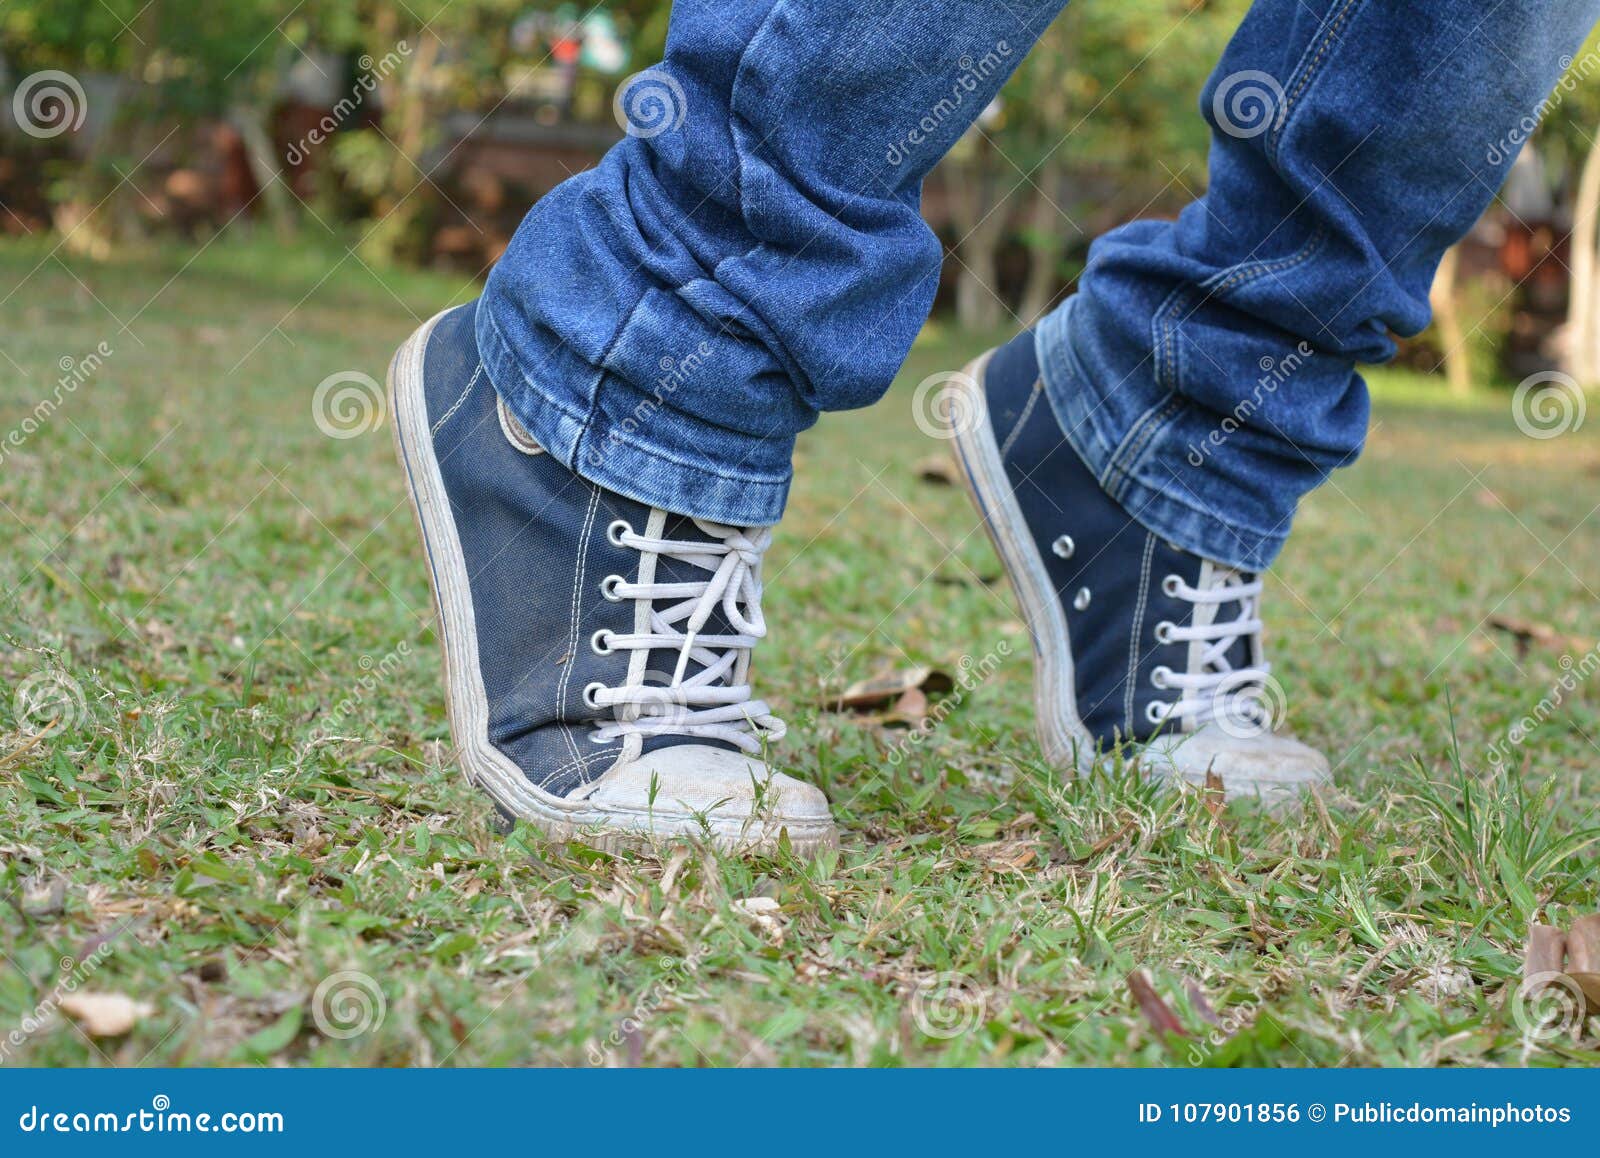 Footwear, Photograph, Grass, Shoe Picture. Image 107901856